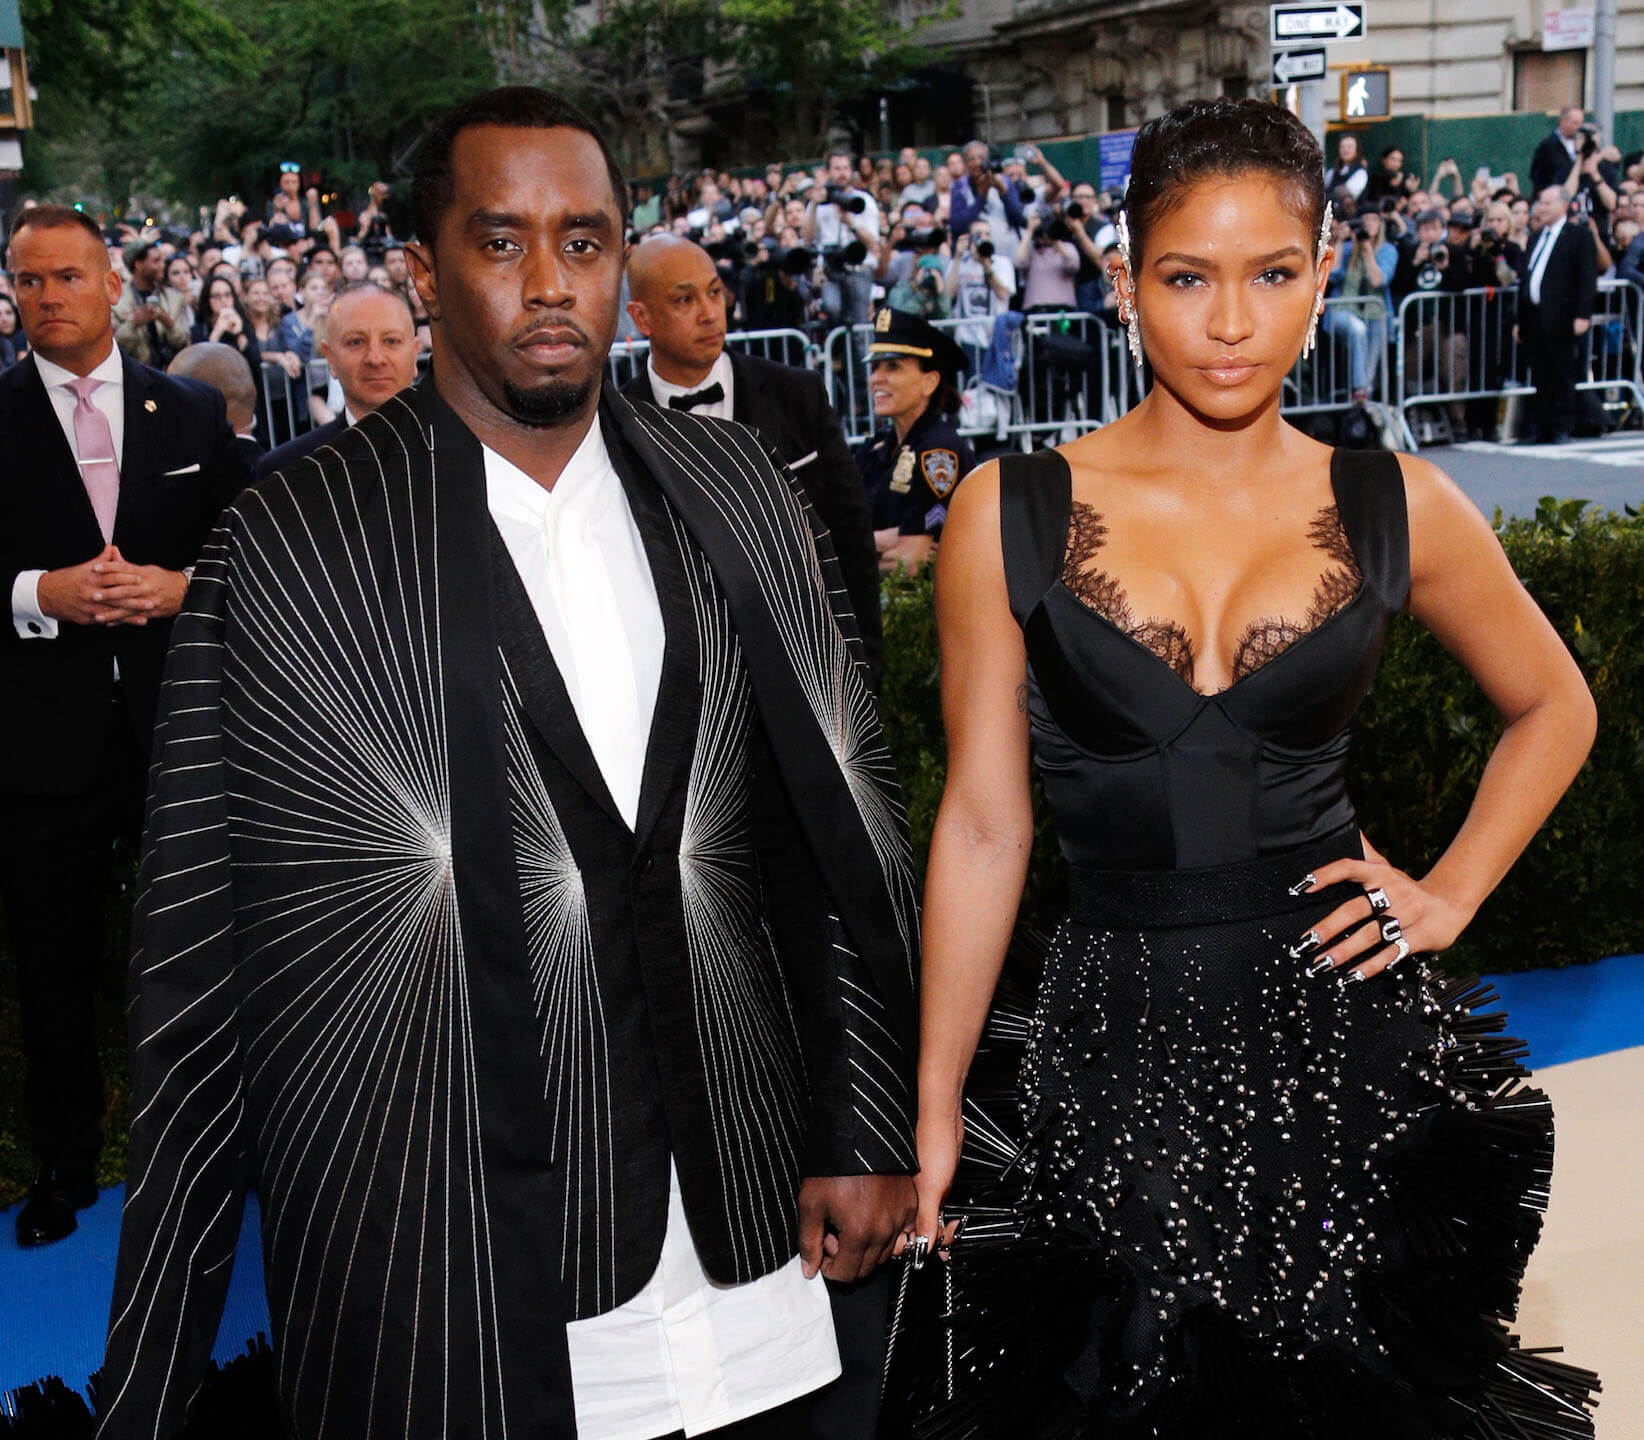 Cassie ‘Barely Spoke and Was Subdued’ at P. Diddy’s Parties, an Insider Alleged